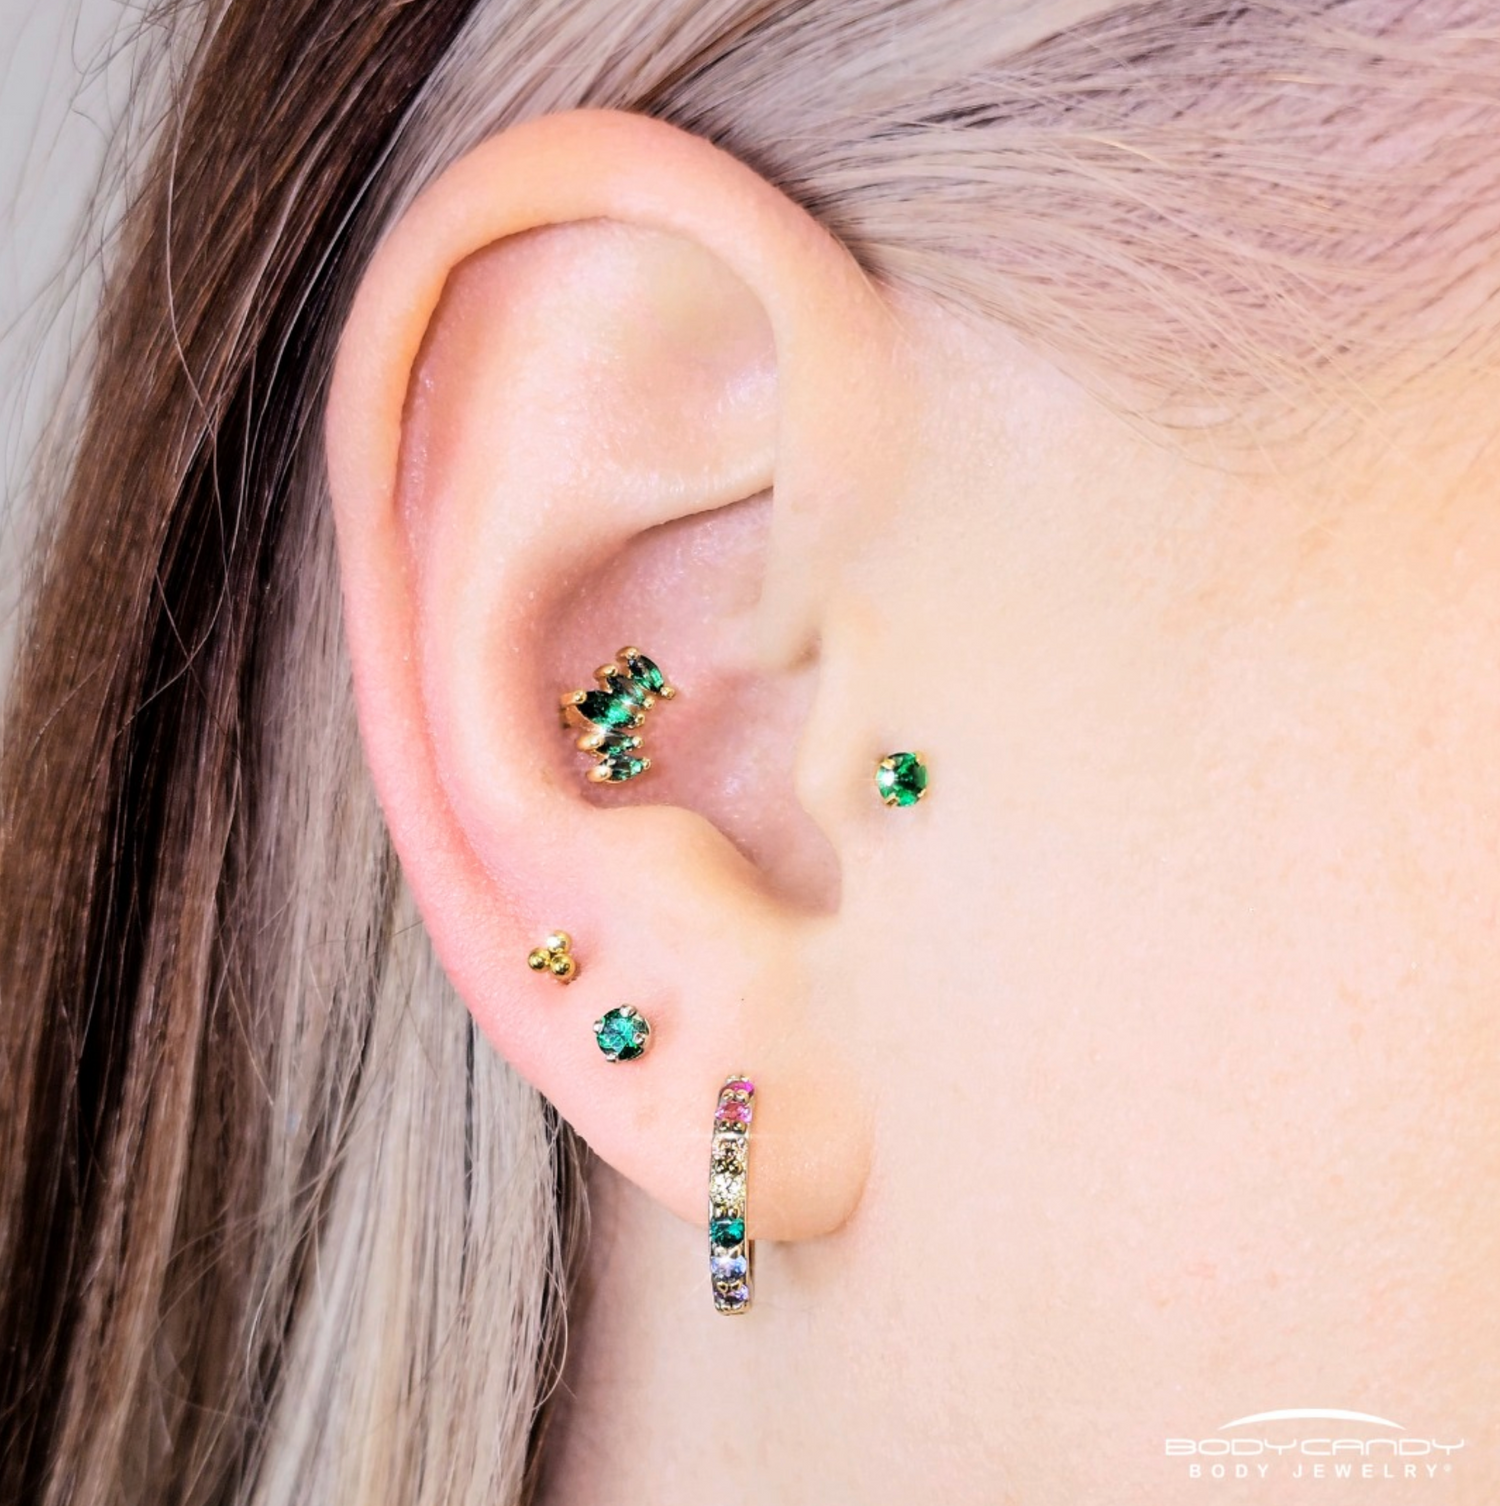 What can you wear in a conch piercing?